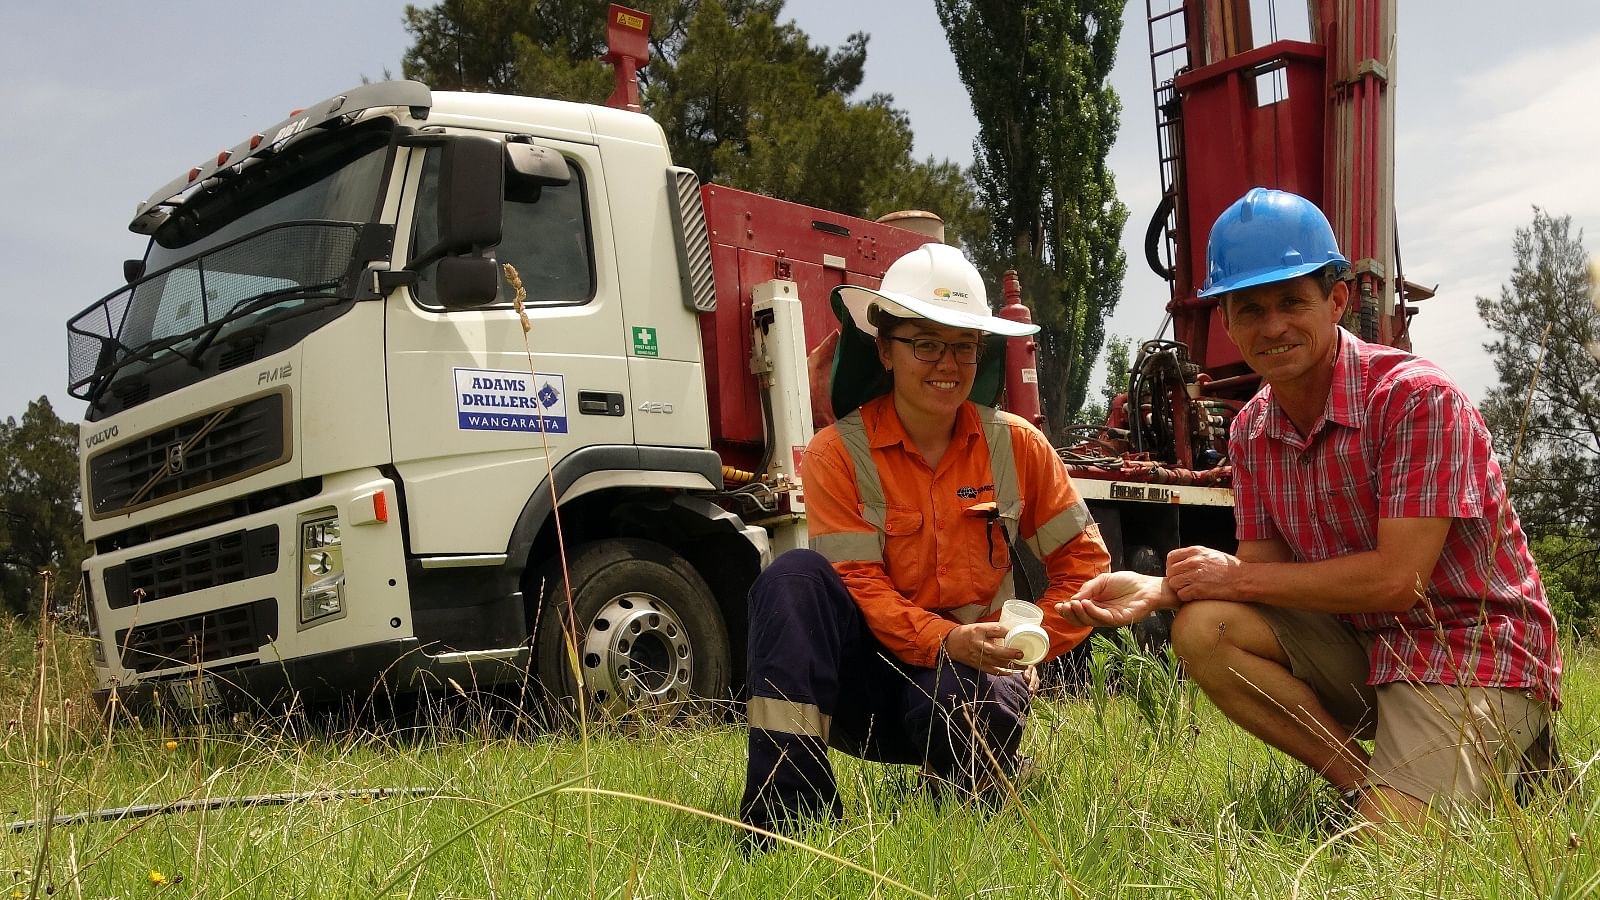 Geologist Ingrid Farr and Bega Valley Shire Council Water Resources Coordinator Ken McLeod sampling sediment from a drilled bore at the Bega borefield.